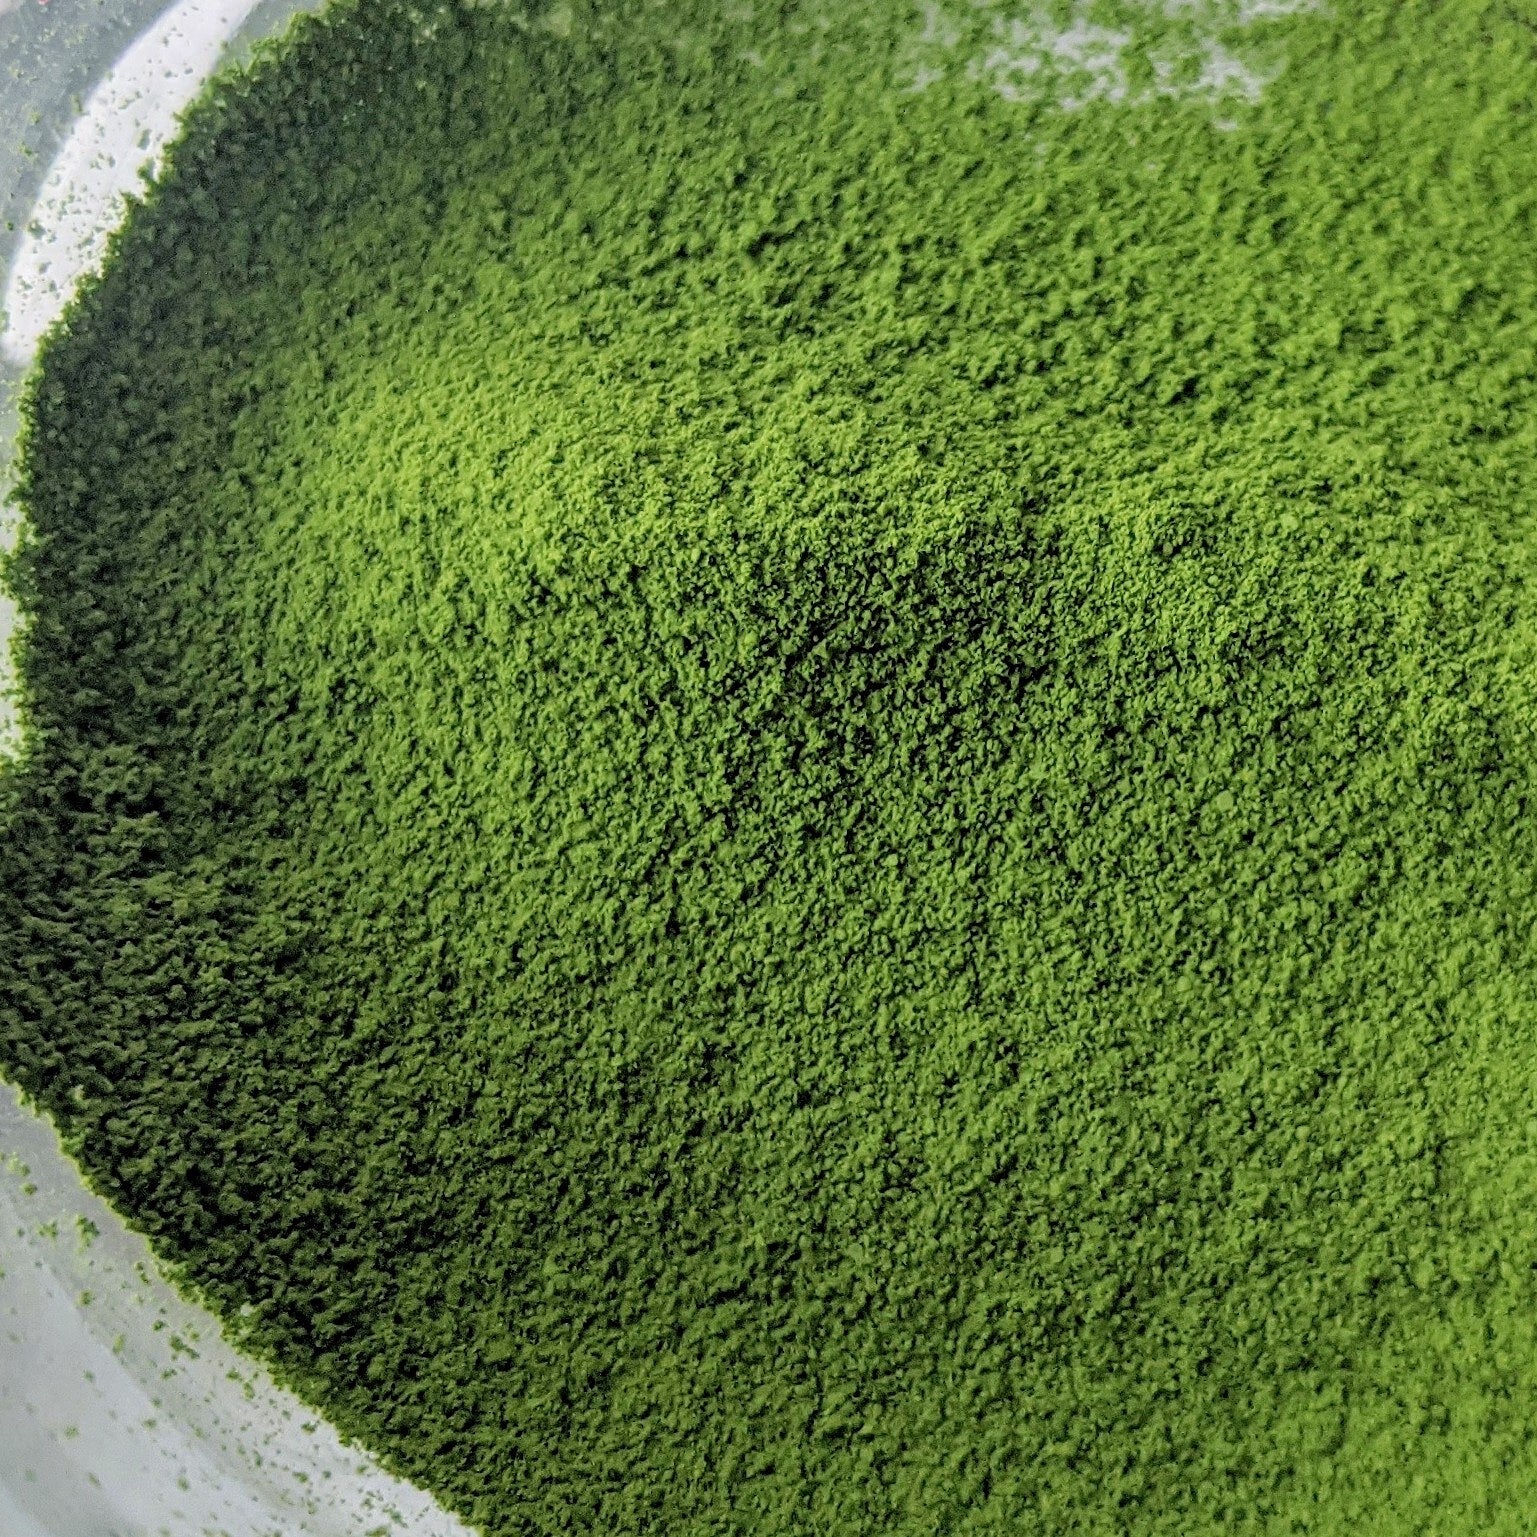 Why Does My Matcha Taste Bitter?